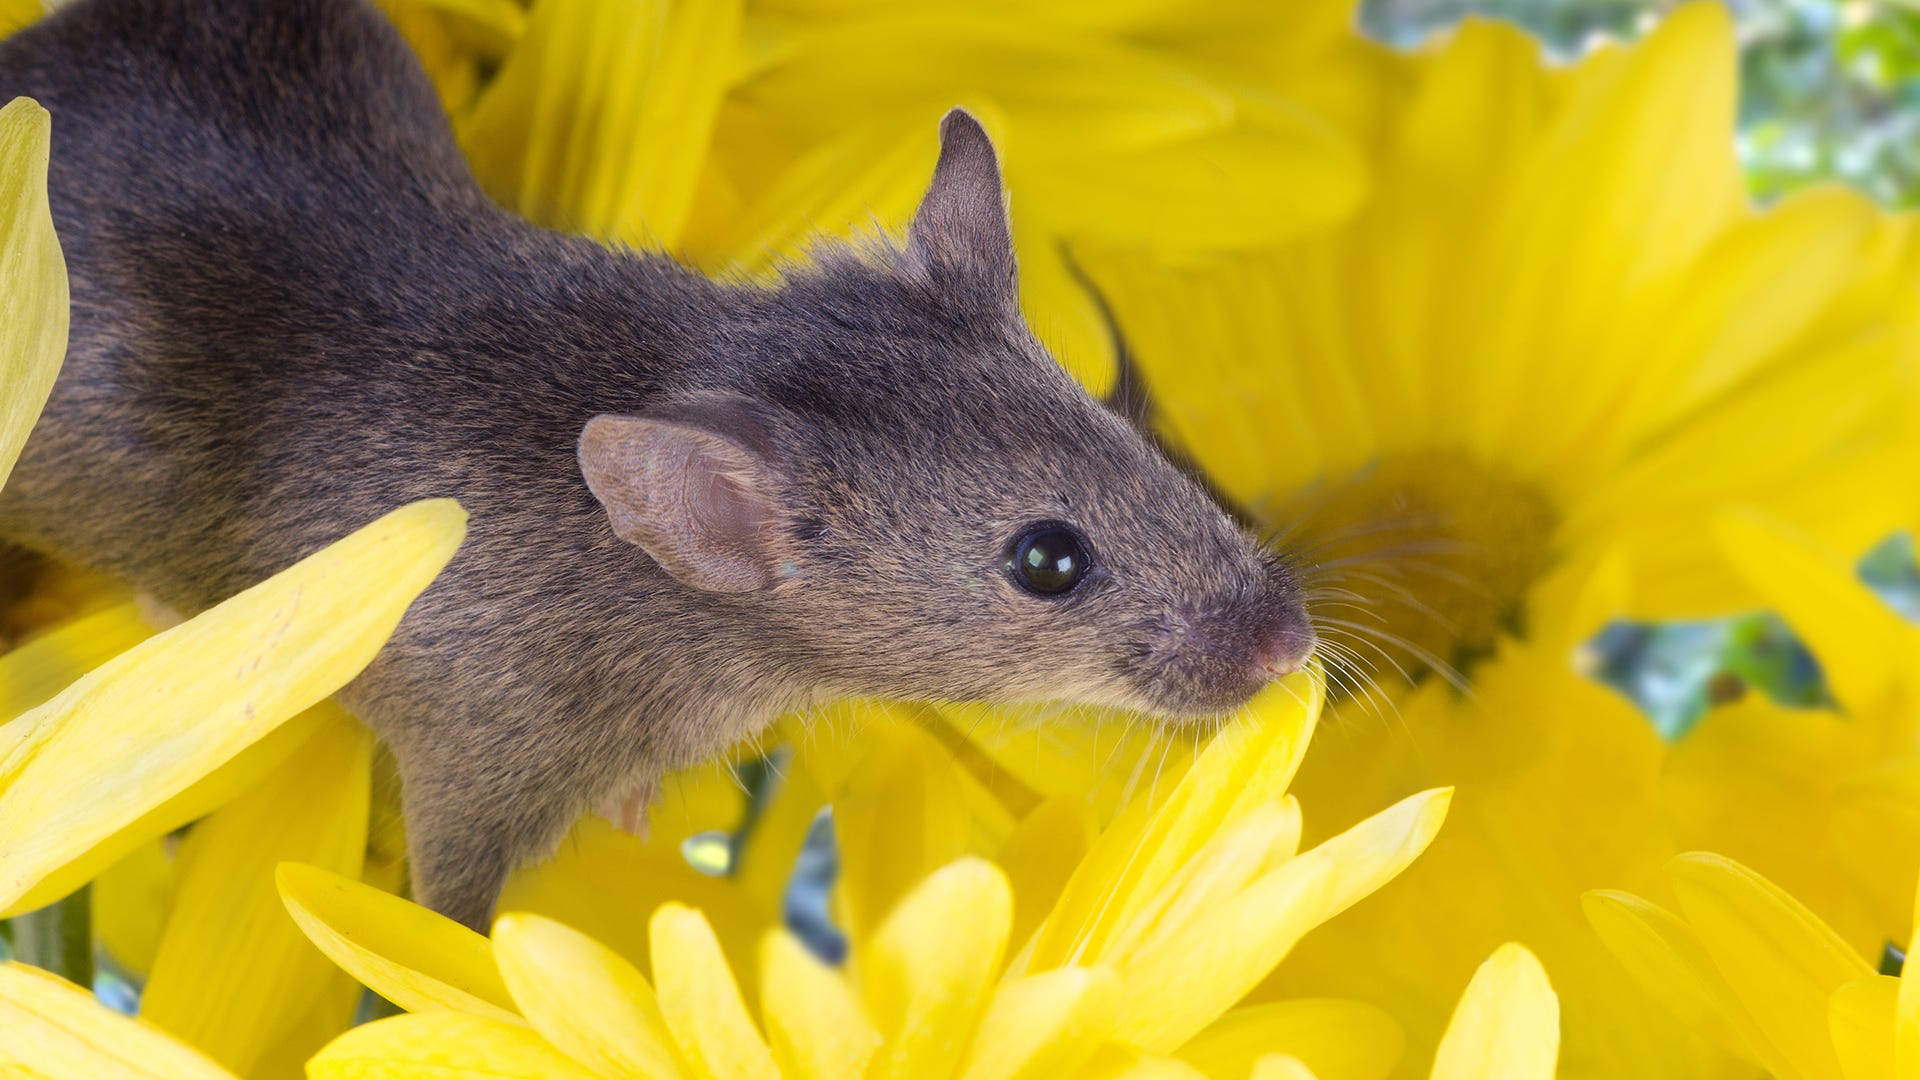 How to Keep Rodents out of the Garden